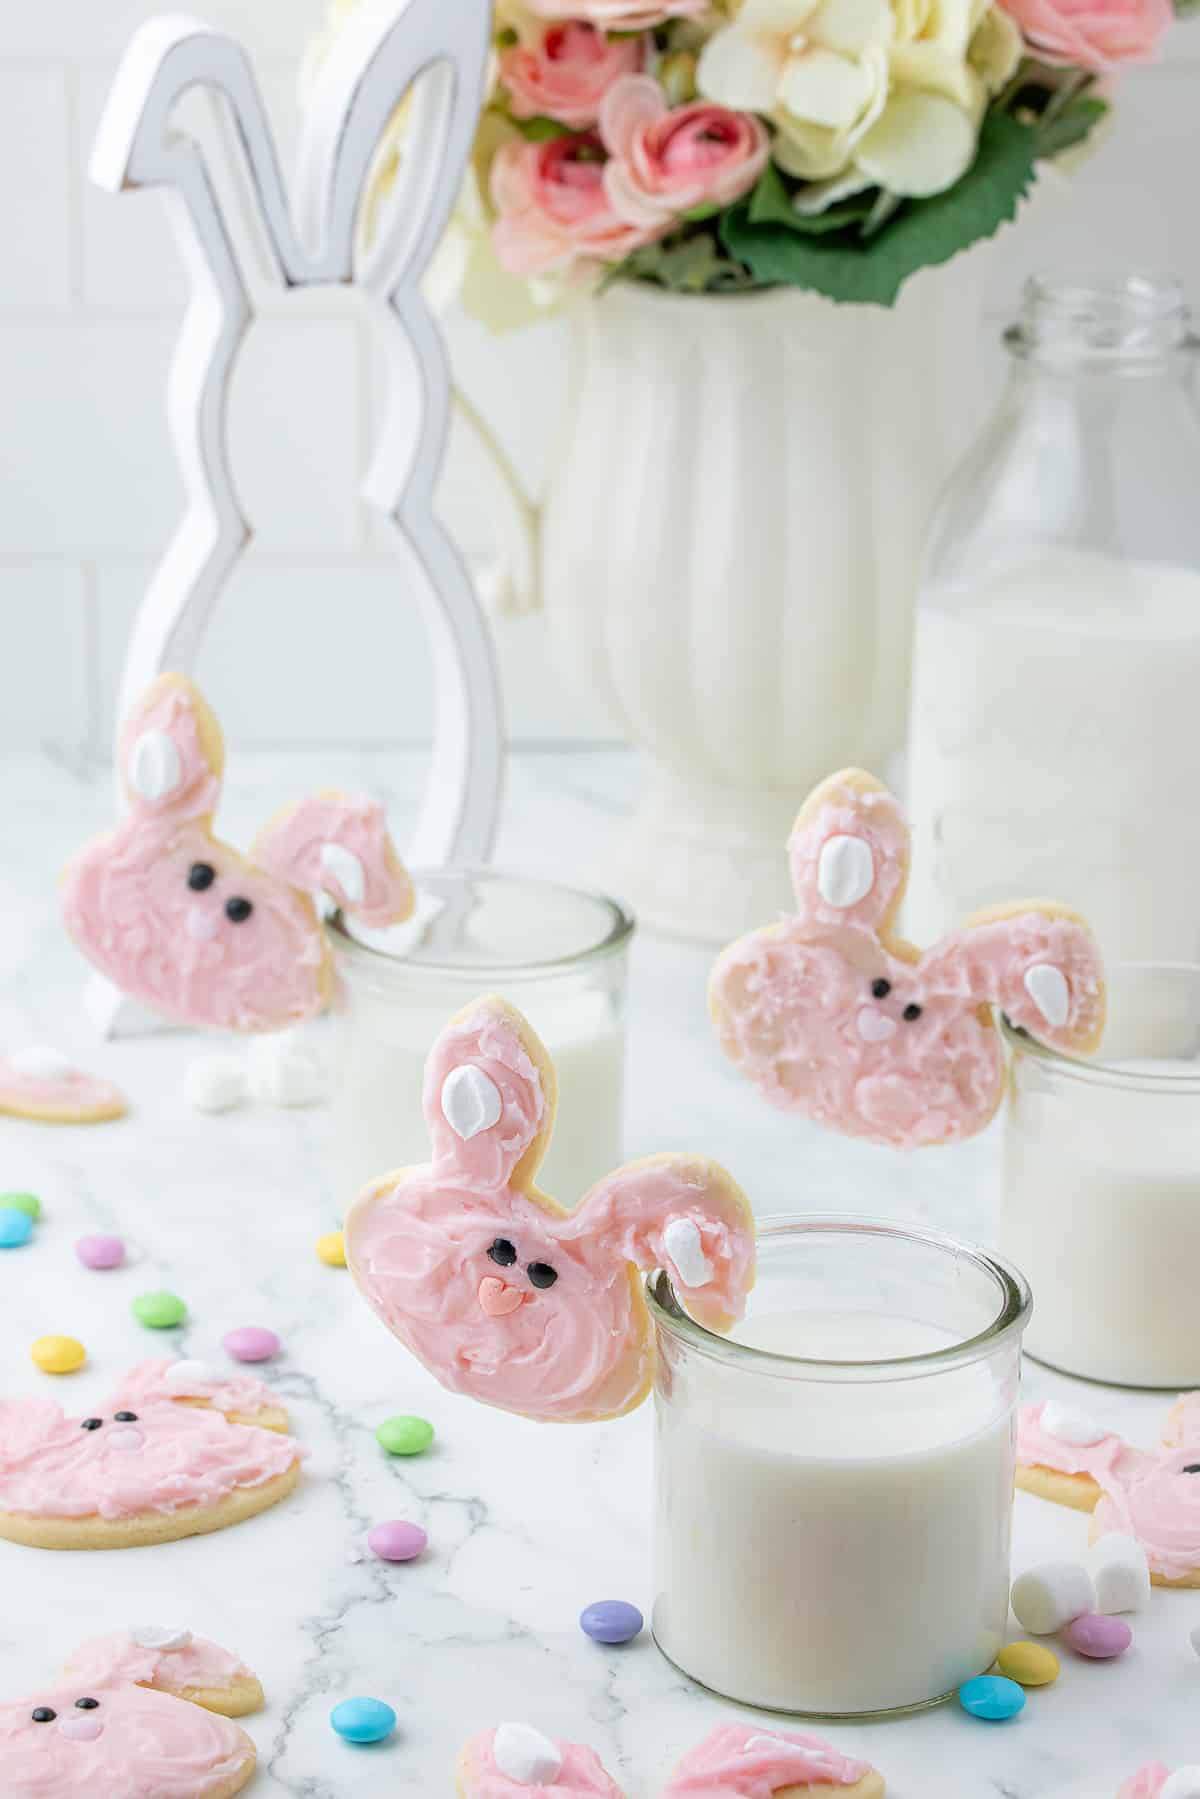 Easter bunny sugar cookies with ears hooked on to glasses of milk